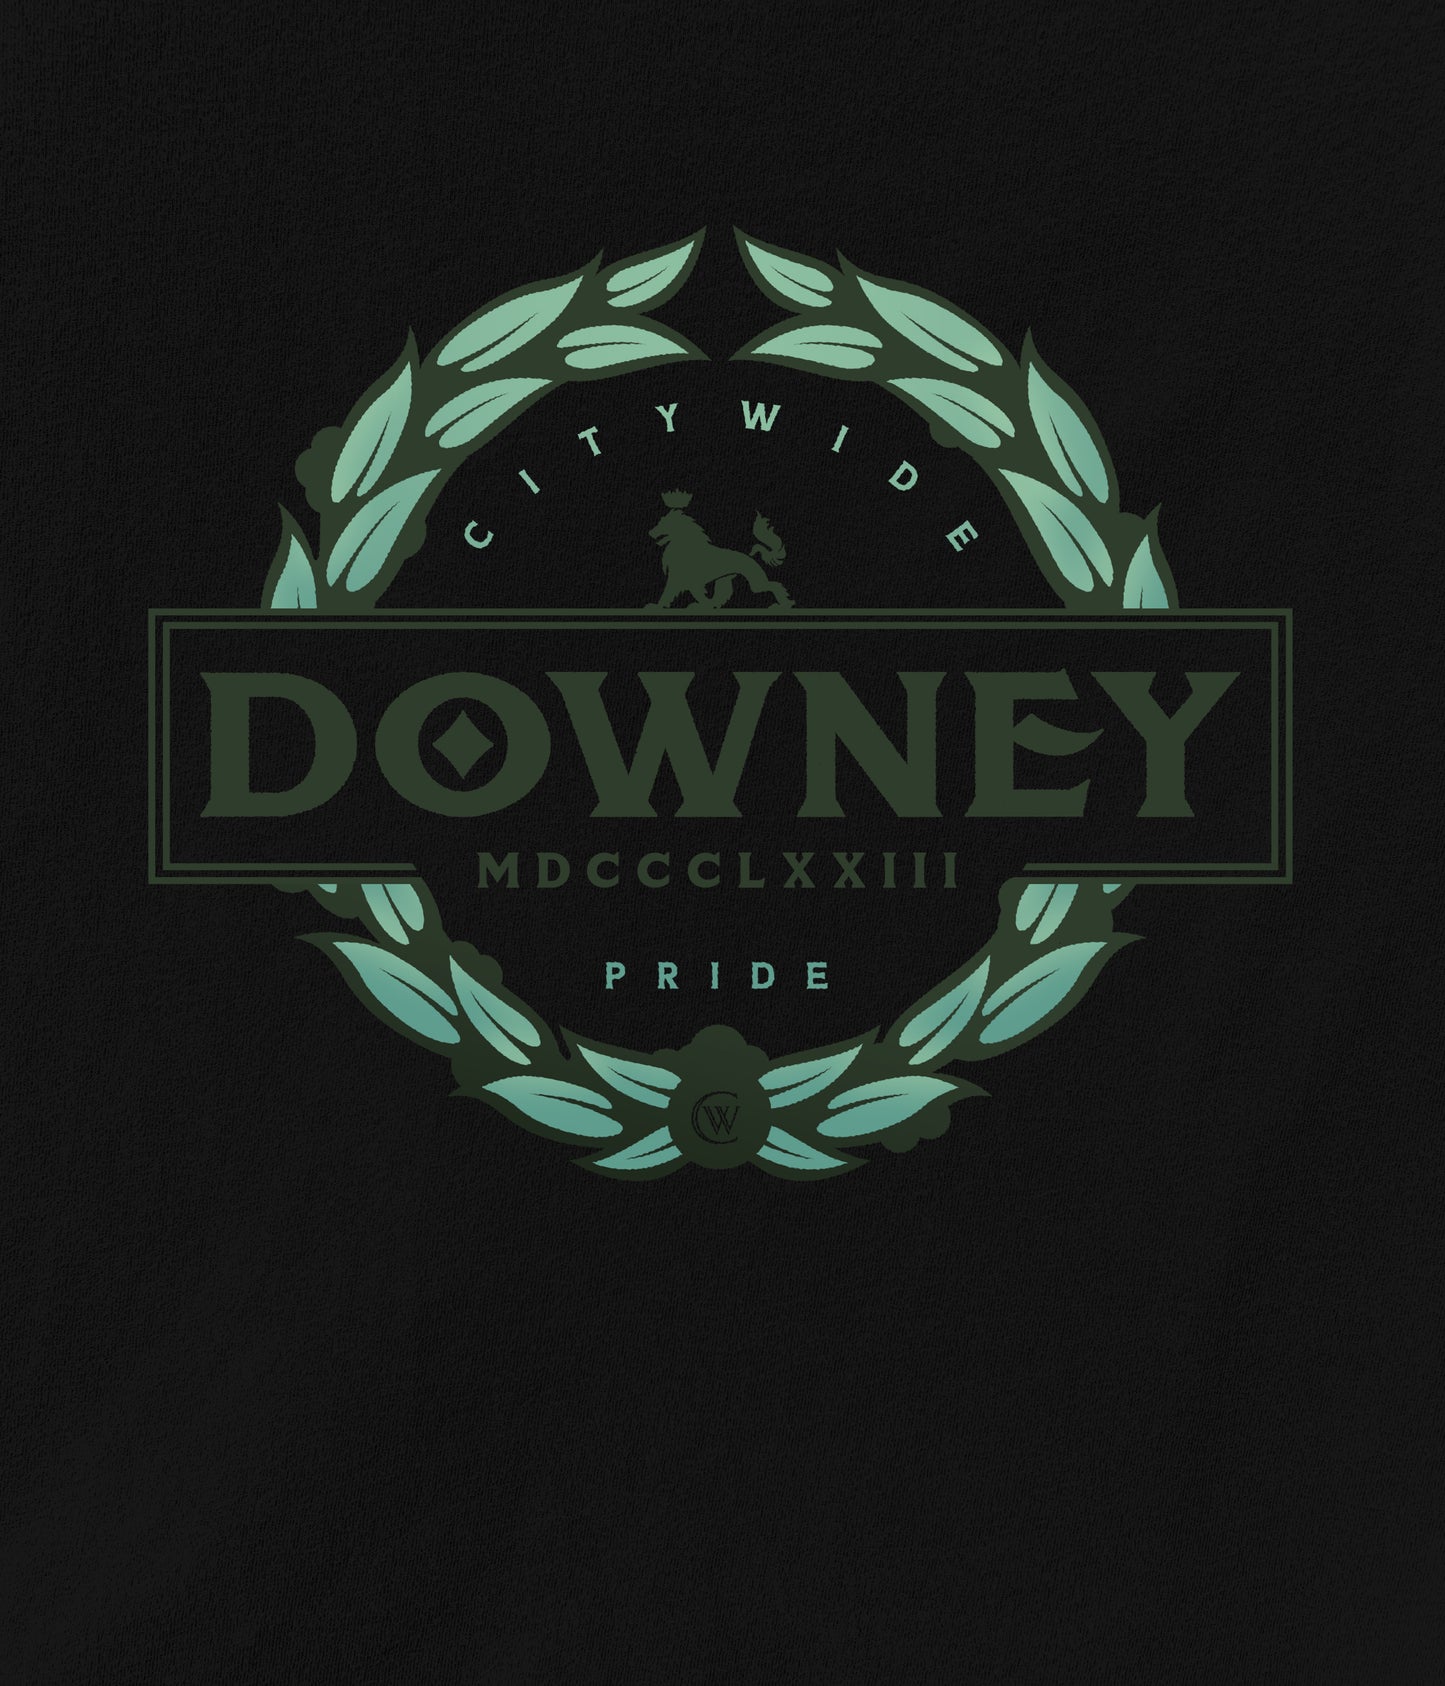 Downey The Pride